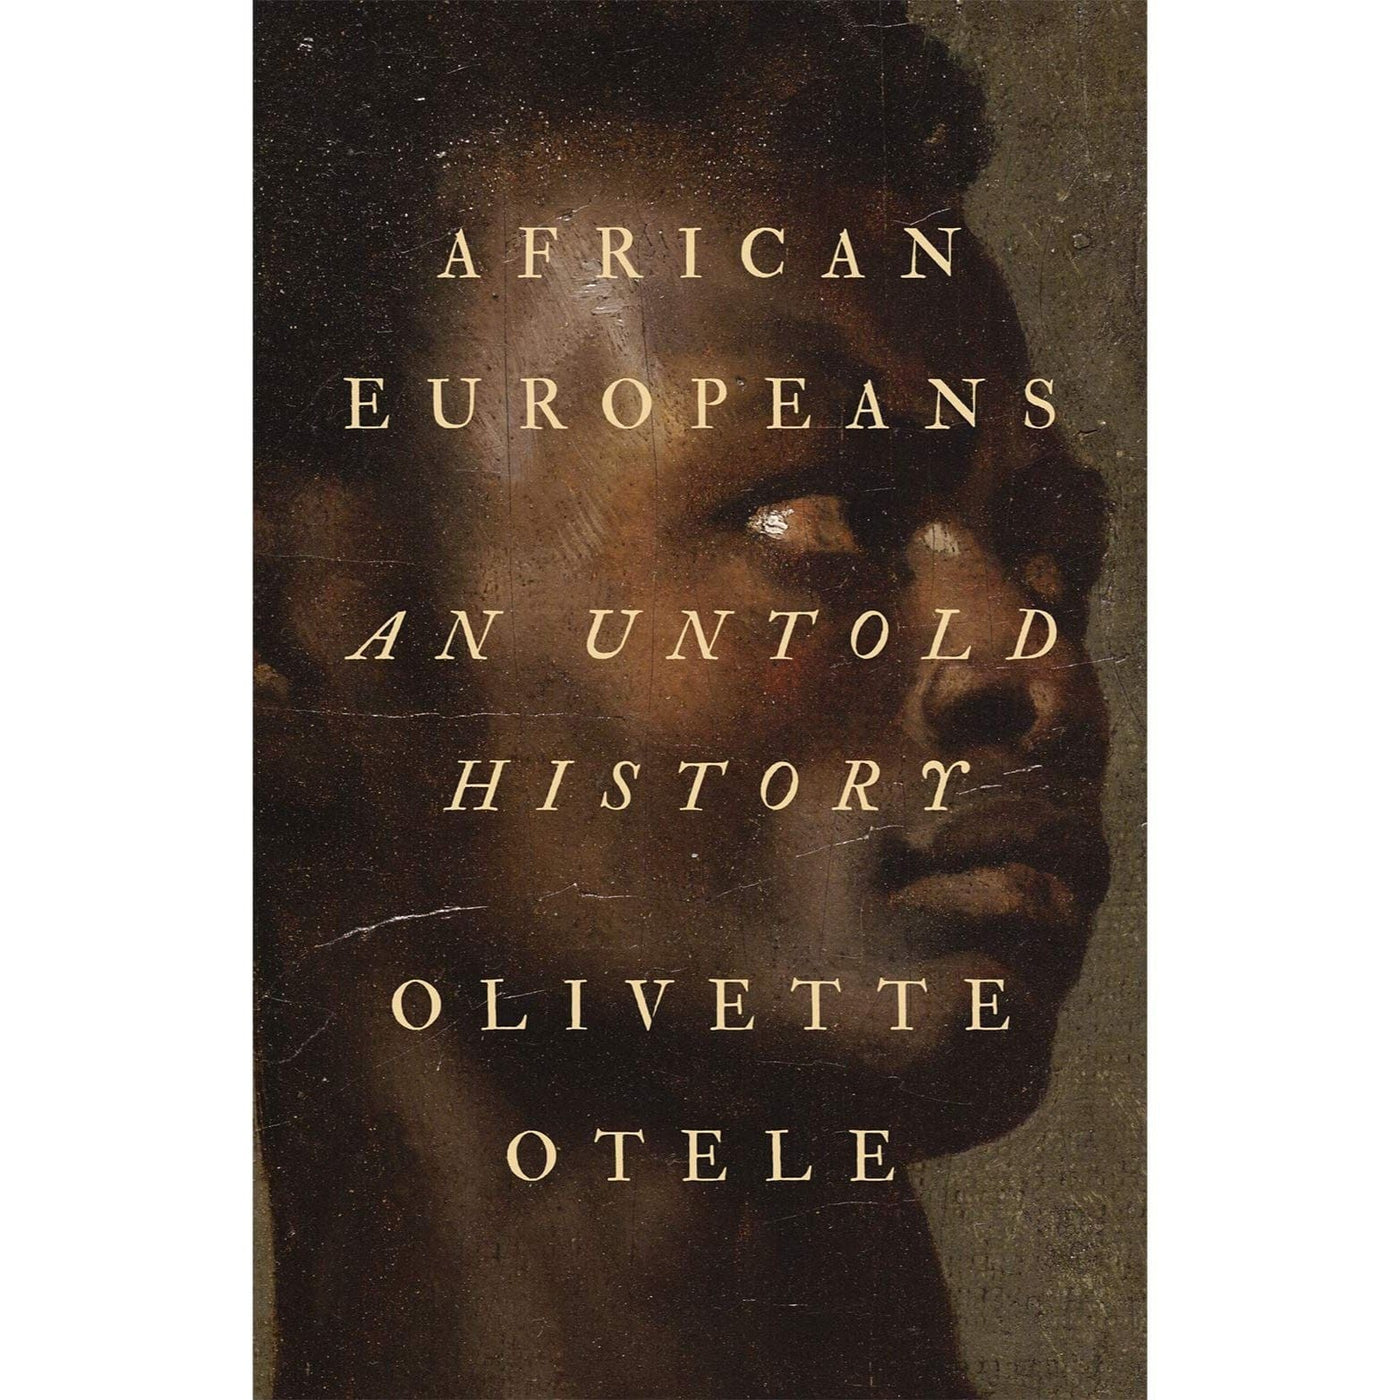 Olivette Otele: African Europeans: An Untold History